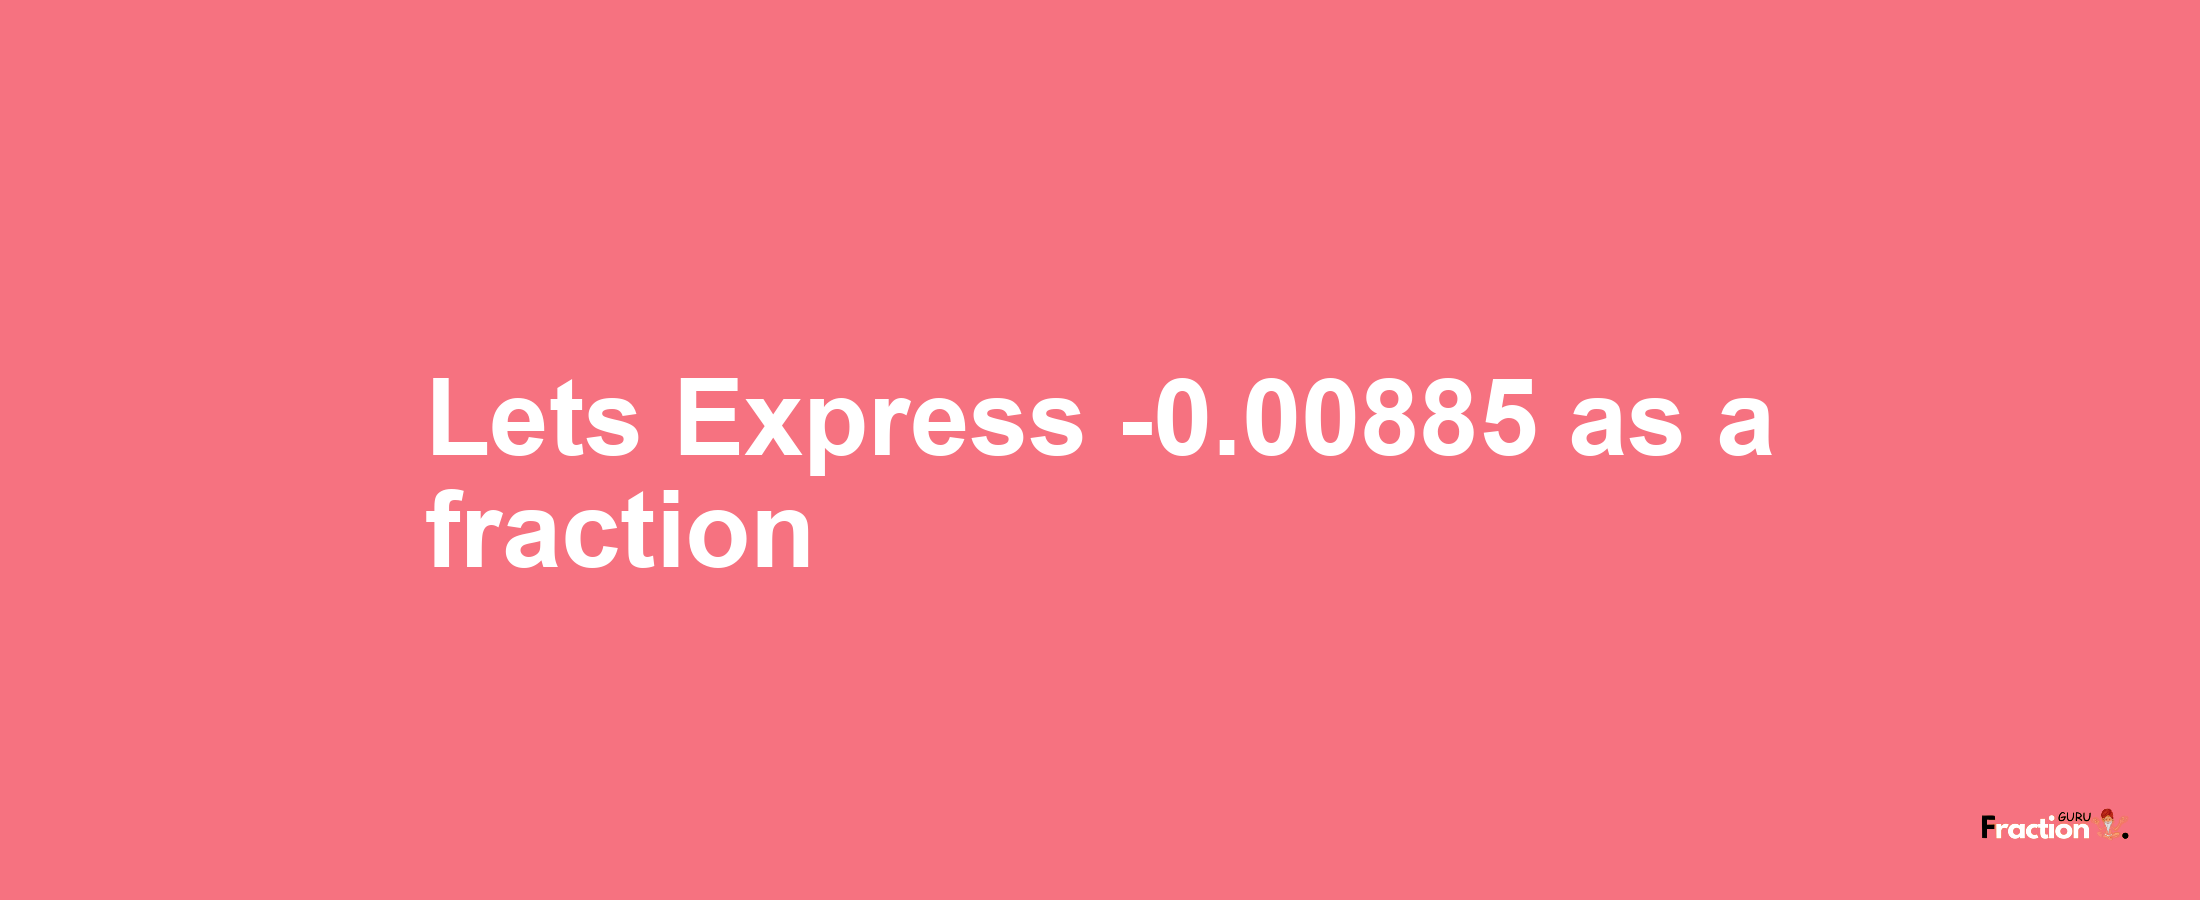 Lets Express -0.00885 as afraction